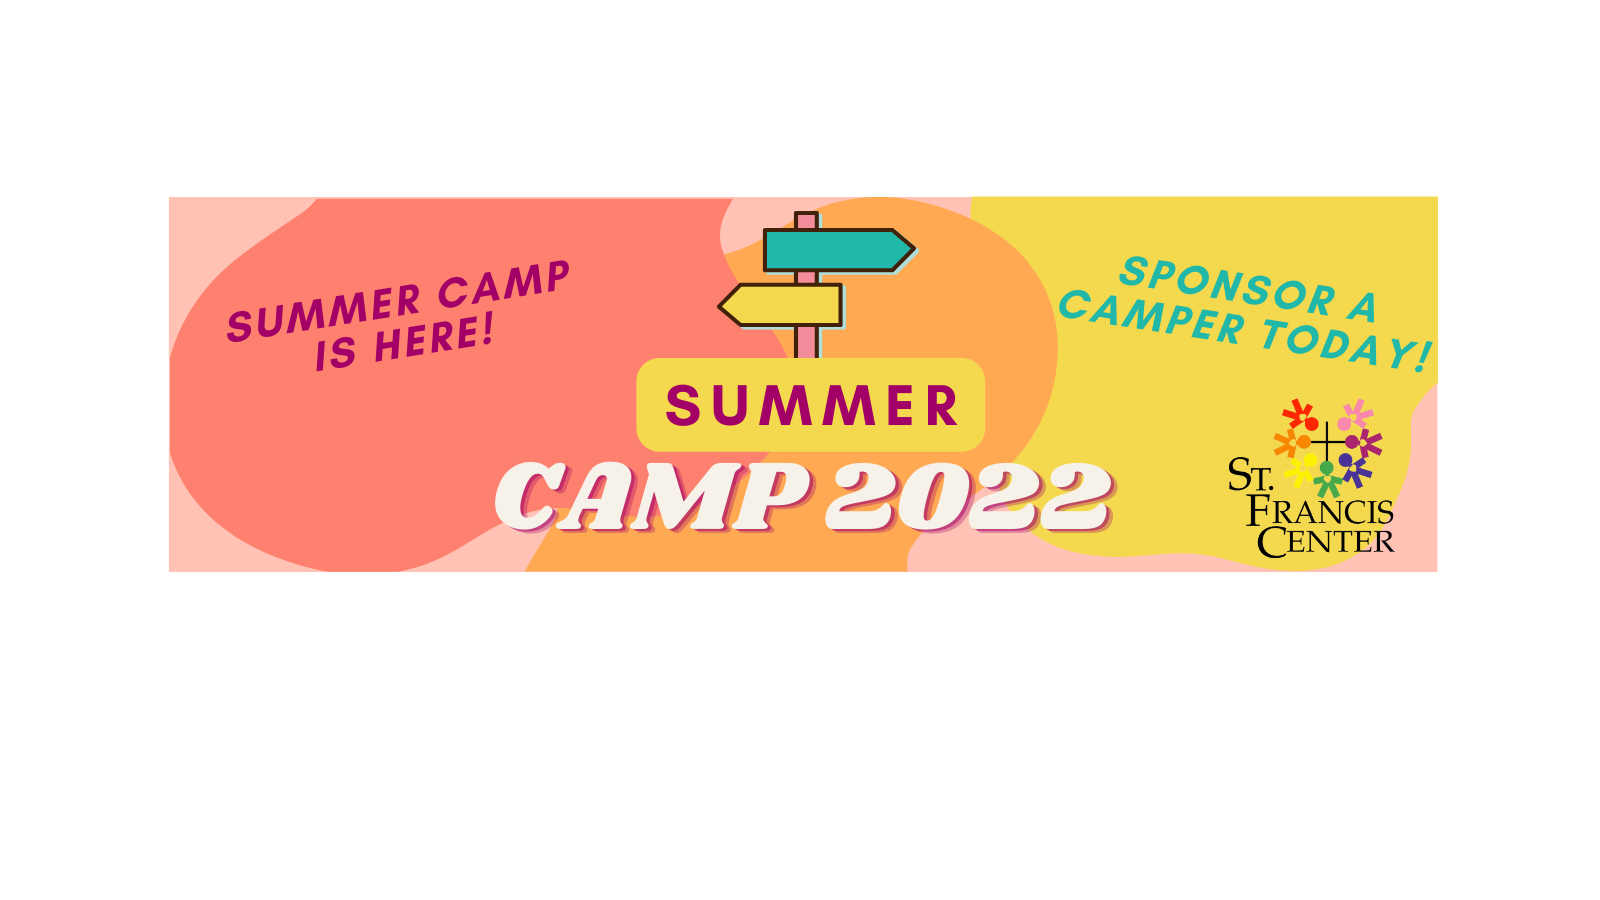 Click here to support summer camp!